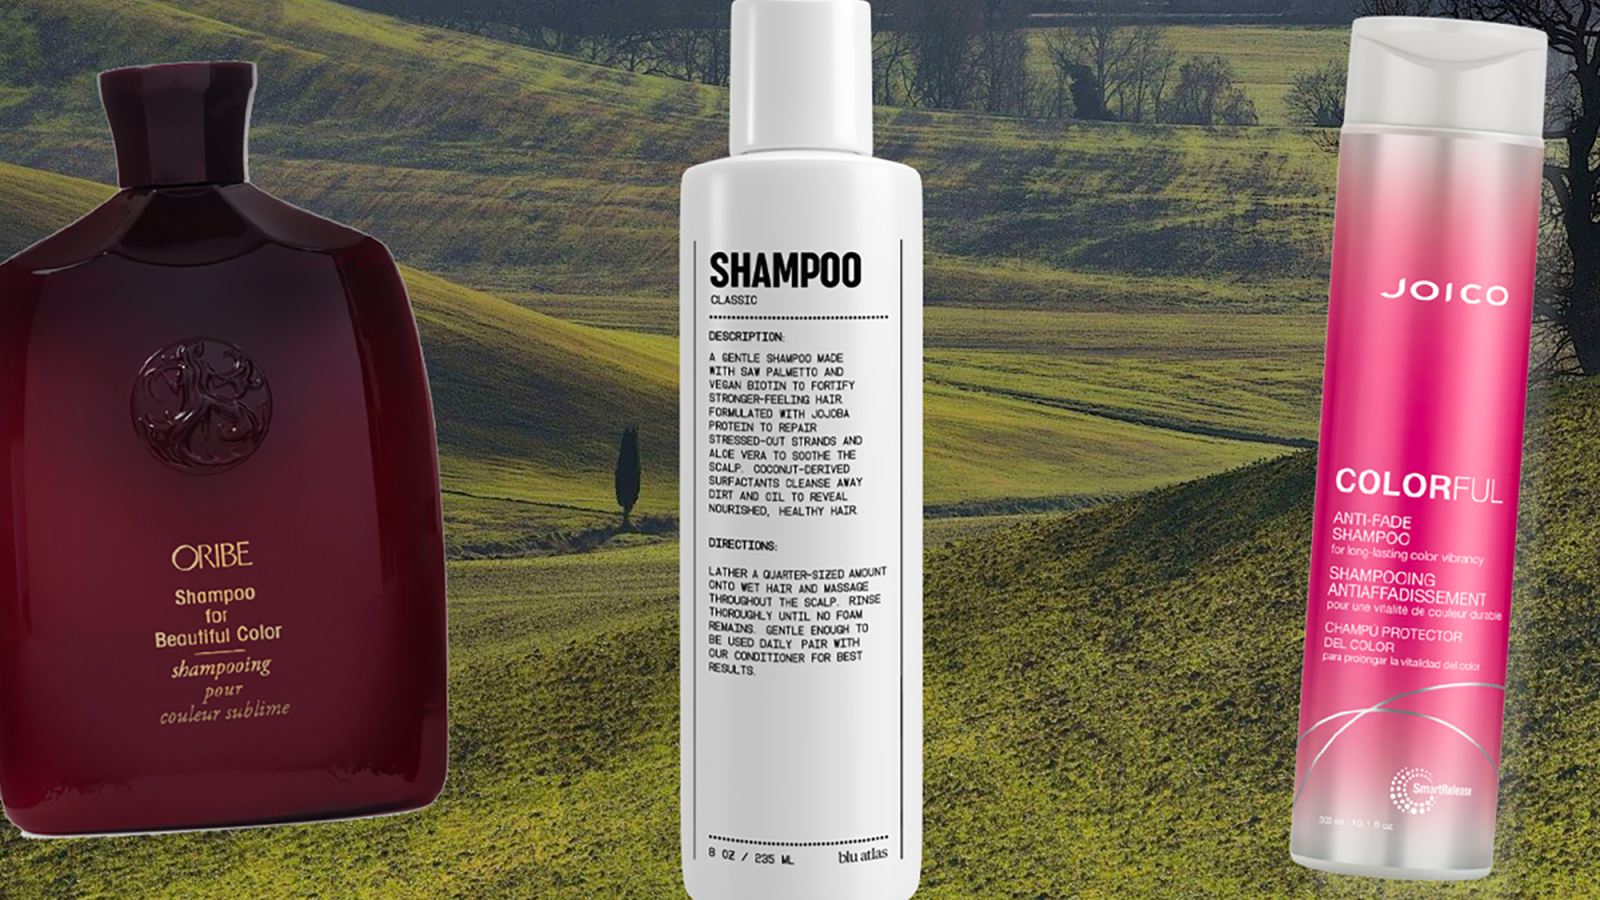 The Best Shampoos and Conditioners for Colored Hair